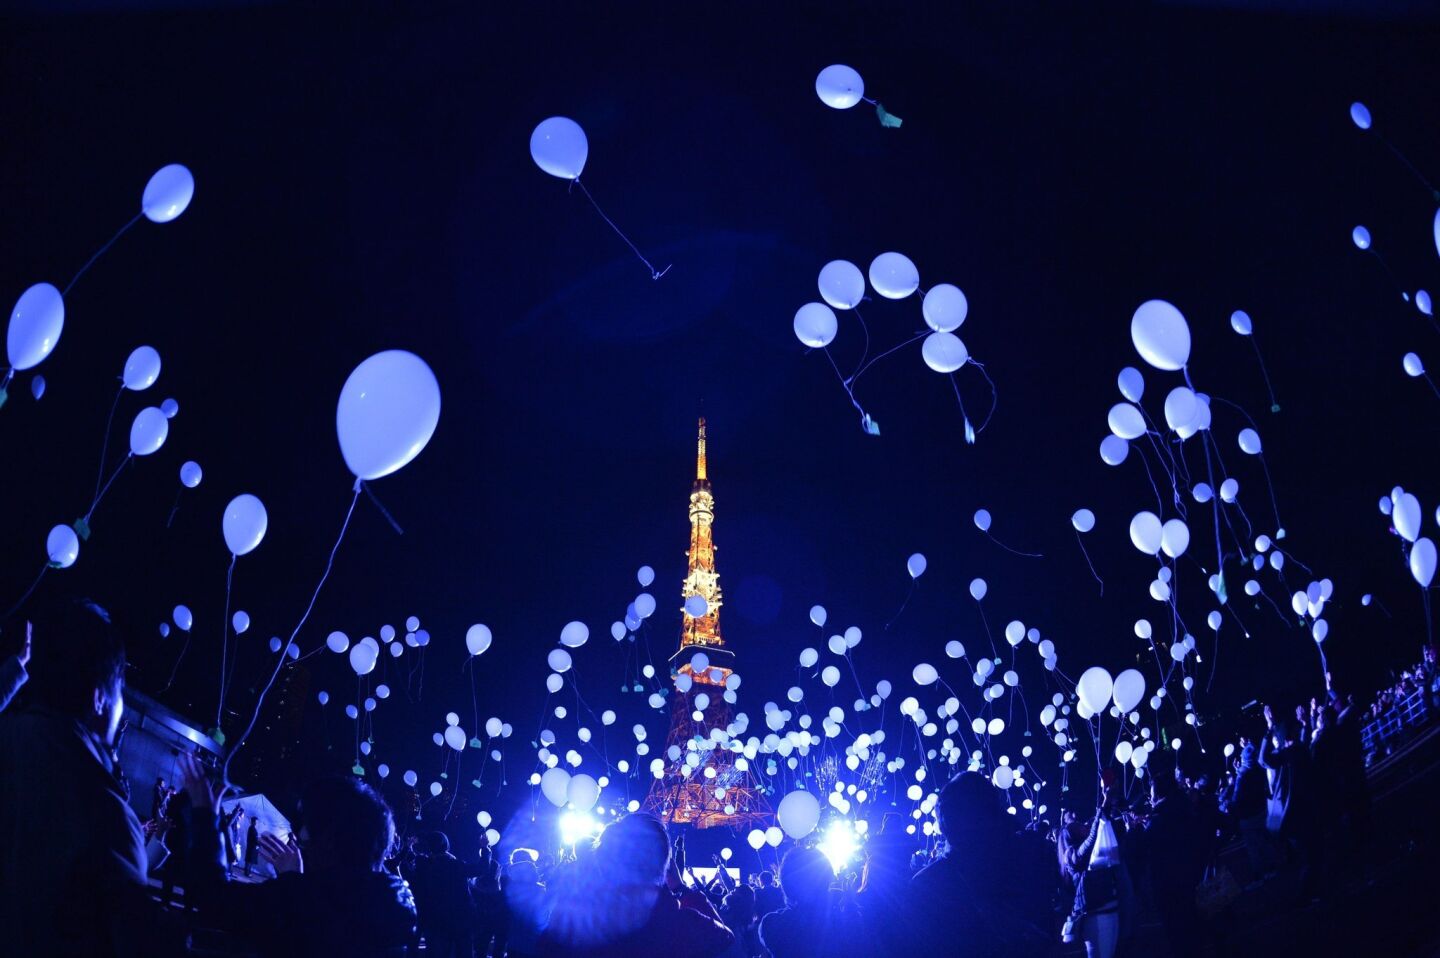 Balloons are released to celebrate the new year at the Prince Park Tower in Tokyo.